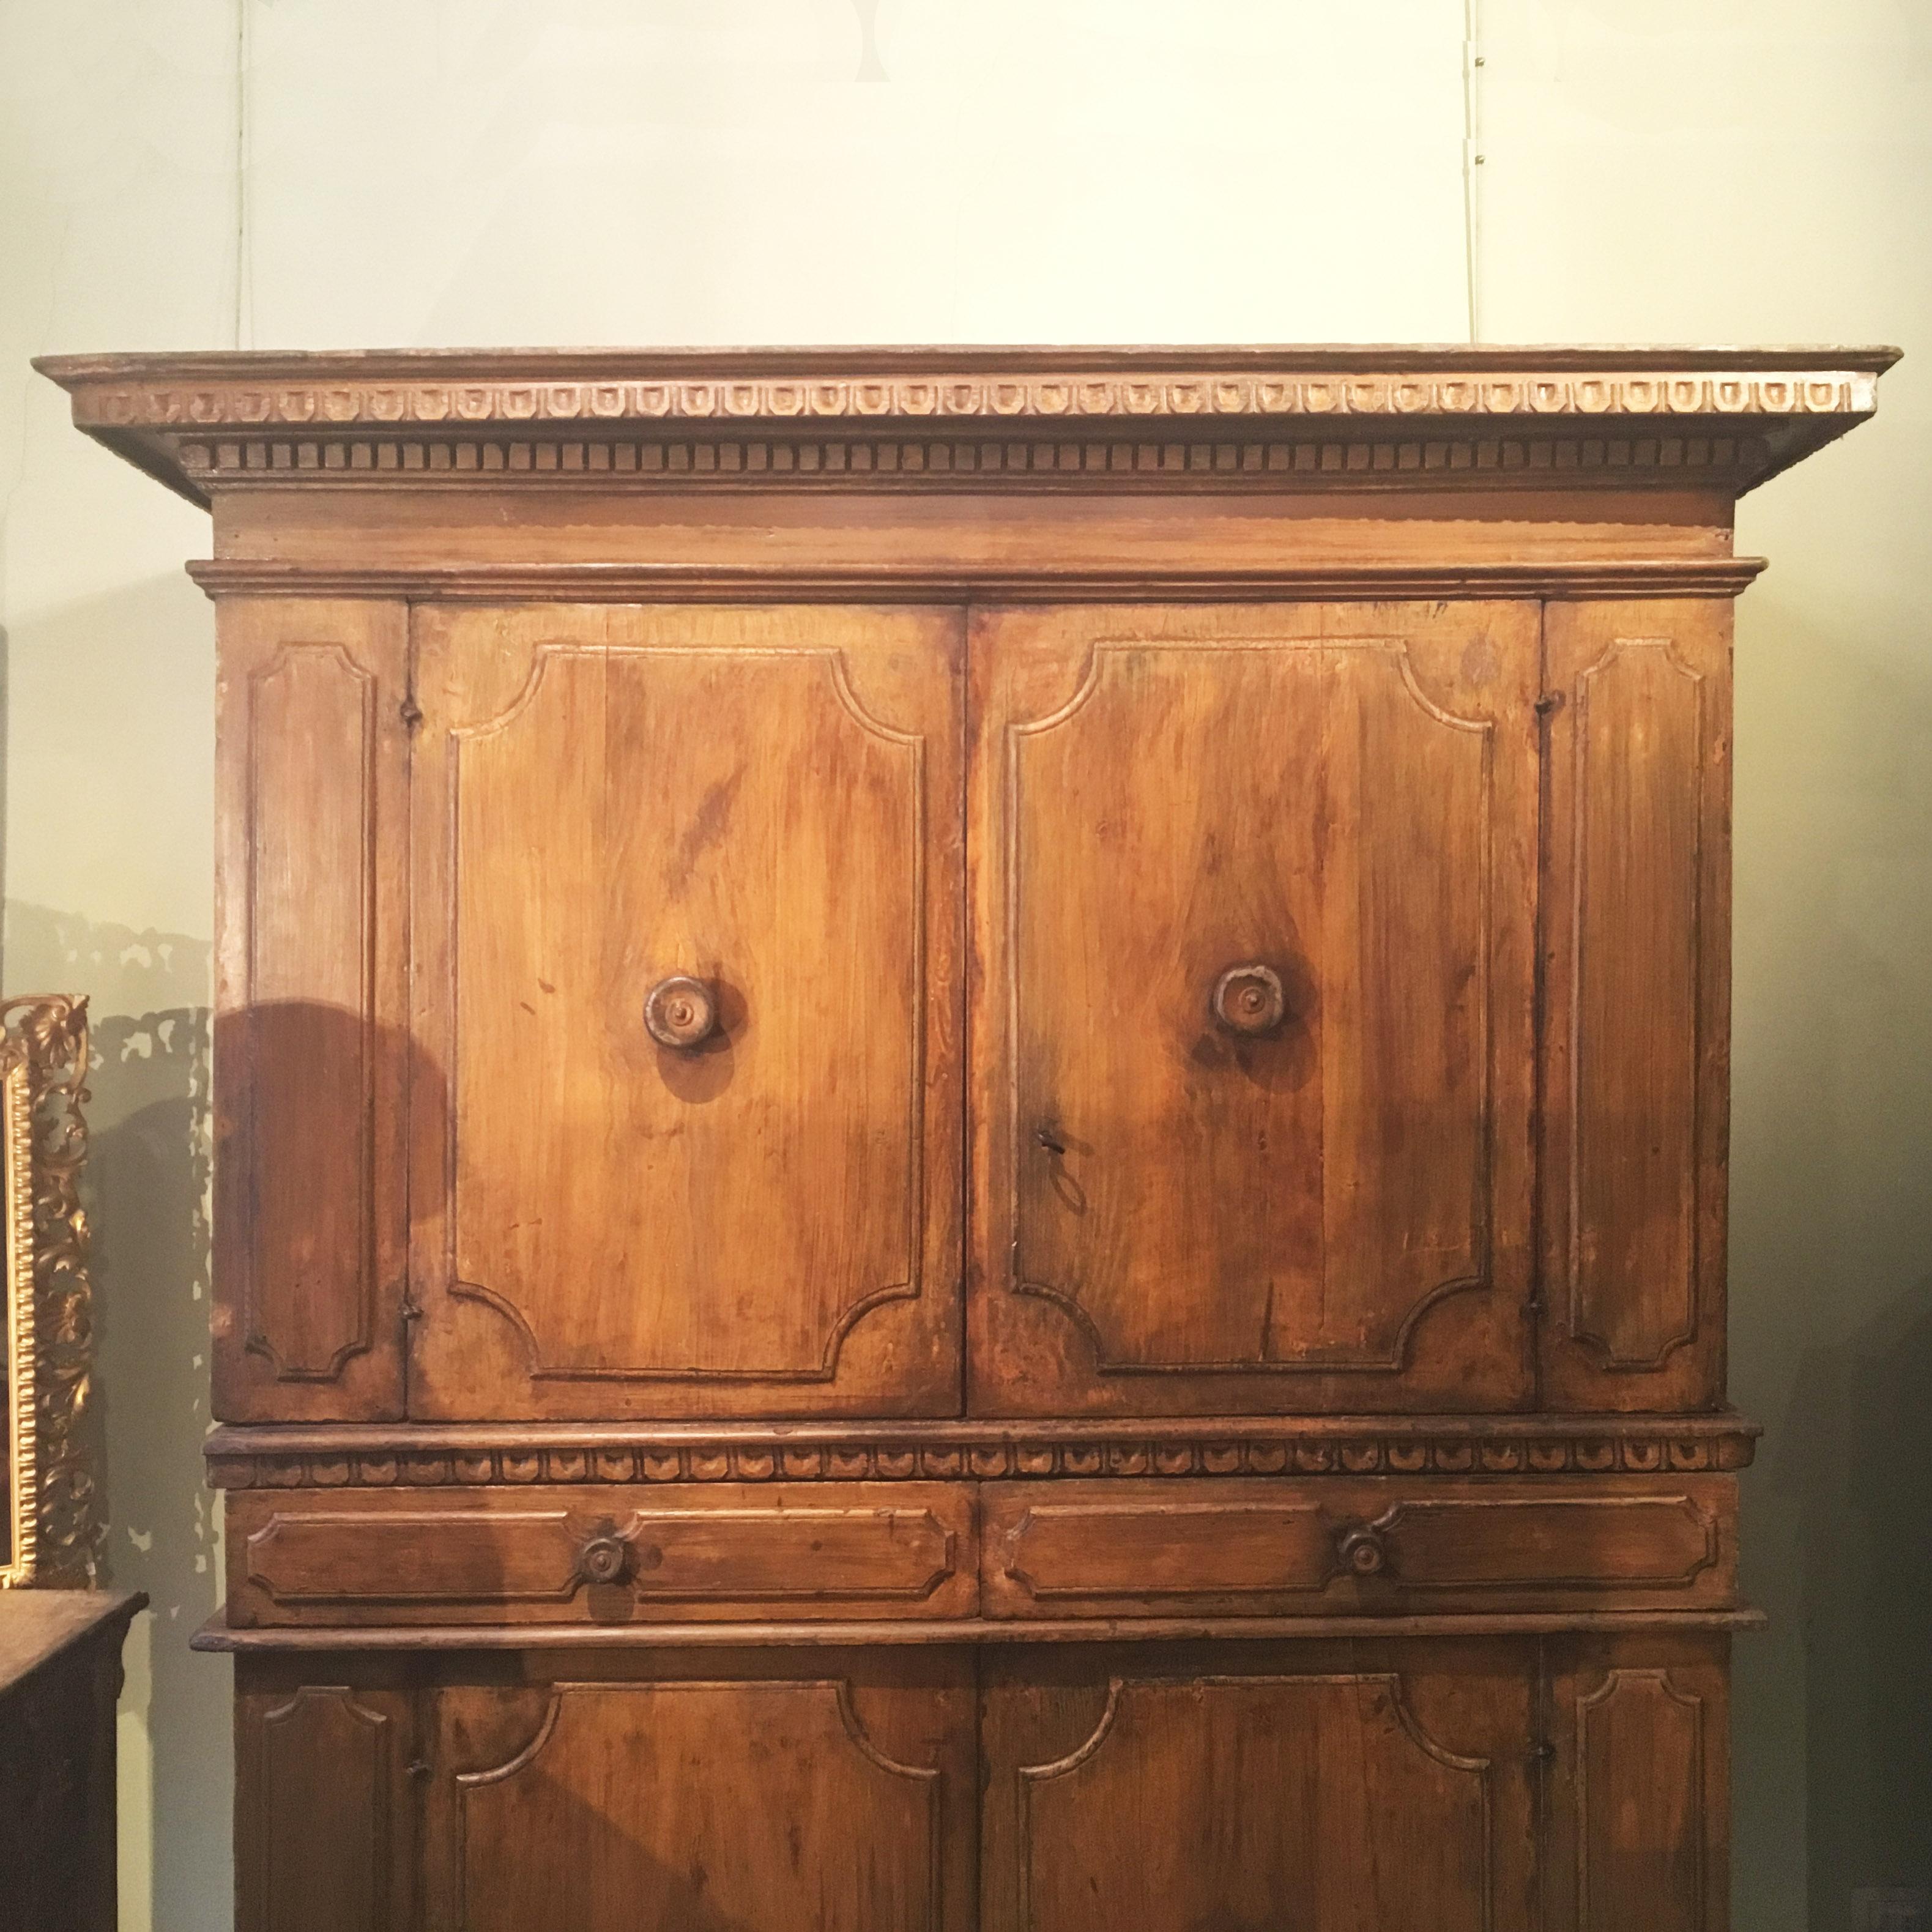 Charming Italian double body storage piece, with a total of four doors and drawers.
The oakwood cabinet is preserving its original painted surface and presents a typical carved decoration and style of Central Italian Renaisance furniture.
Bologna,